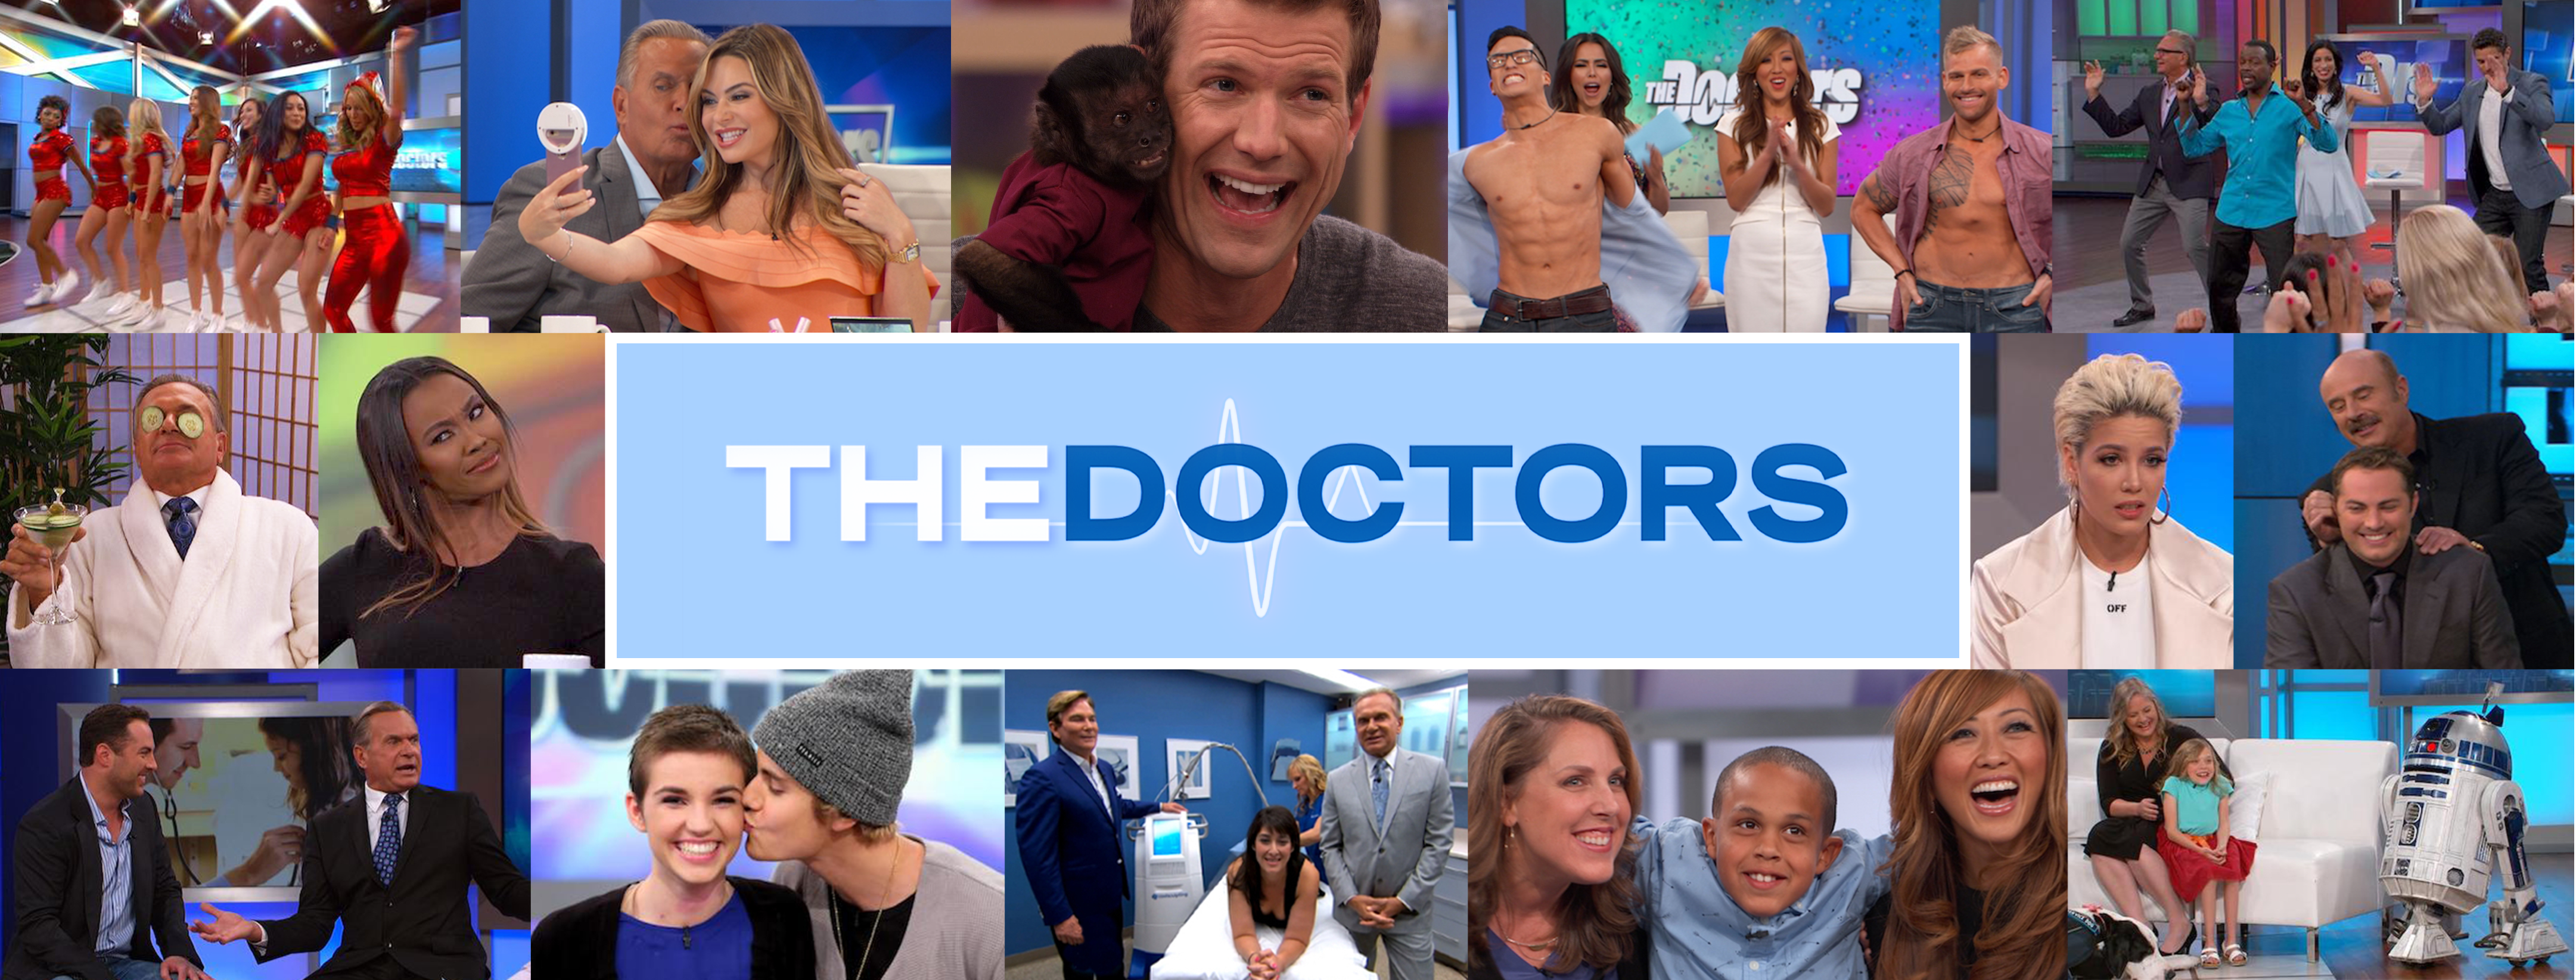 A Groundbreaking Face Transplant The Doctors Tv Show